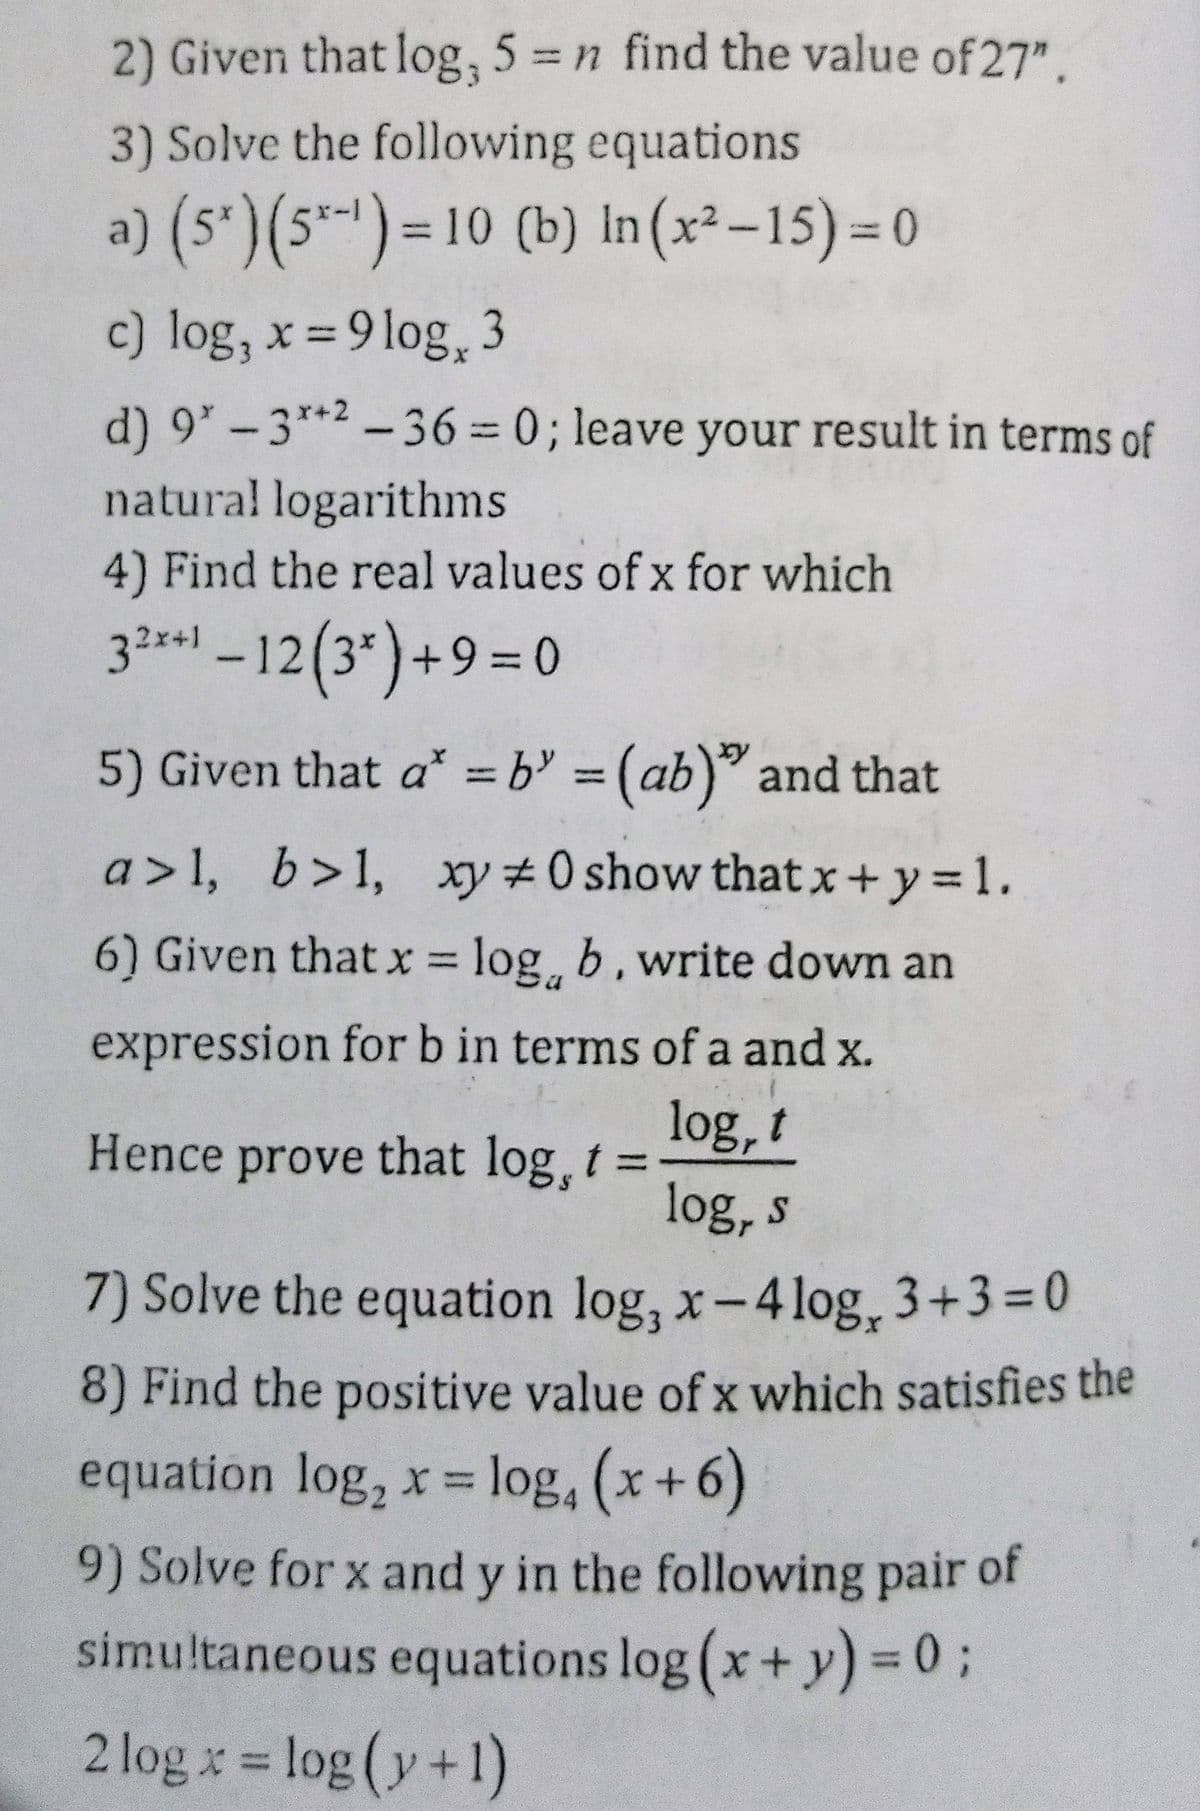 2) Given that log, 5 = n find the value of 27".
3) Solve the following equations
a) (s')(5-)= 10 (b) In (x²-15) = 0
c) log, x = 9 log,3
d) 9*-3**2 -36 = 0; leave your result in terms of
natural logarithms
4) Find the real values of x for which
32r01 – 12(3*)+9=0
5) Given that a* = b = (ab)" and that
%3D
a>1, b>1, xy #0 show that x+y = 1.
6) Given that x = log, b, write down an
%3D
expression for b in terms of a and x.
log, t
log, s
Hence prove that log, t=
7) Solve the equation log, x-4log, 3+3=0
8) Find the positive value of x which satisfies the
equation log, x= log, (x+6)
%3D
9) Solve for x and y in the following pair of
simultaneous equations log (x+y)% 3 %3B
2 log x = log (y+1)
%3D
